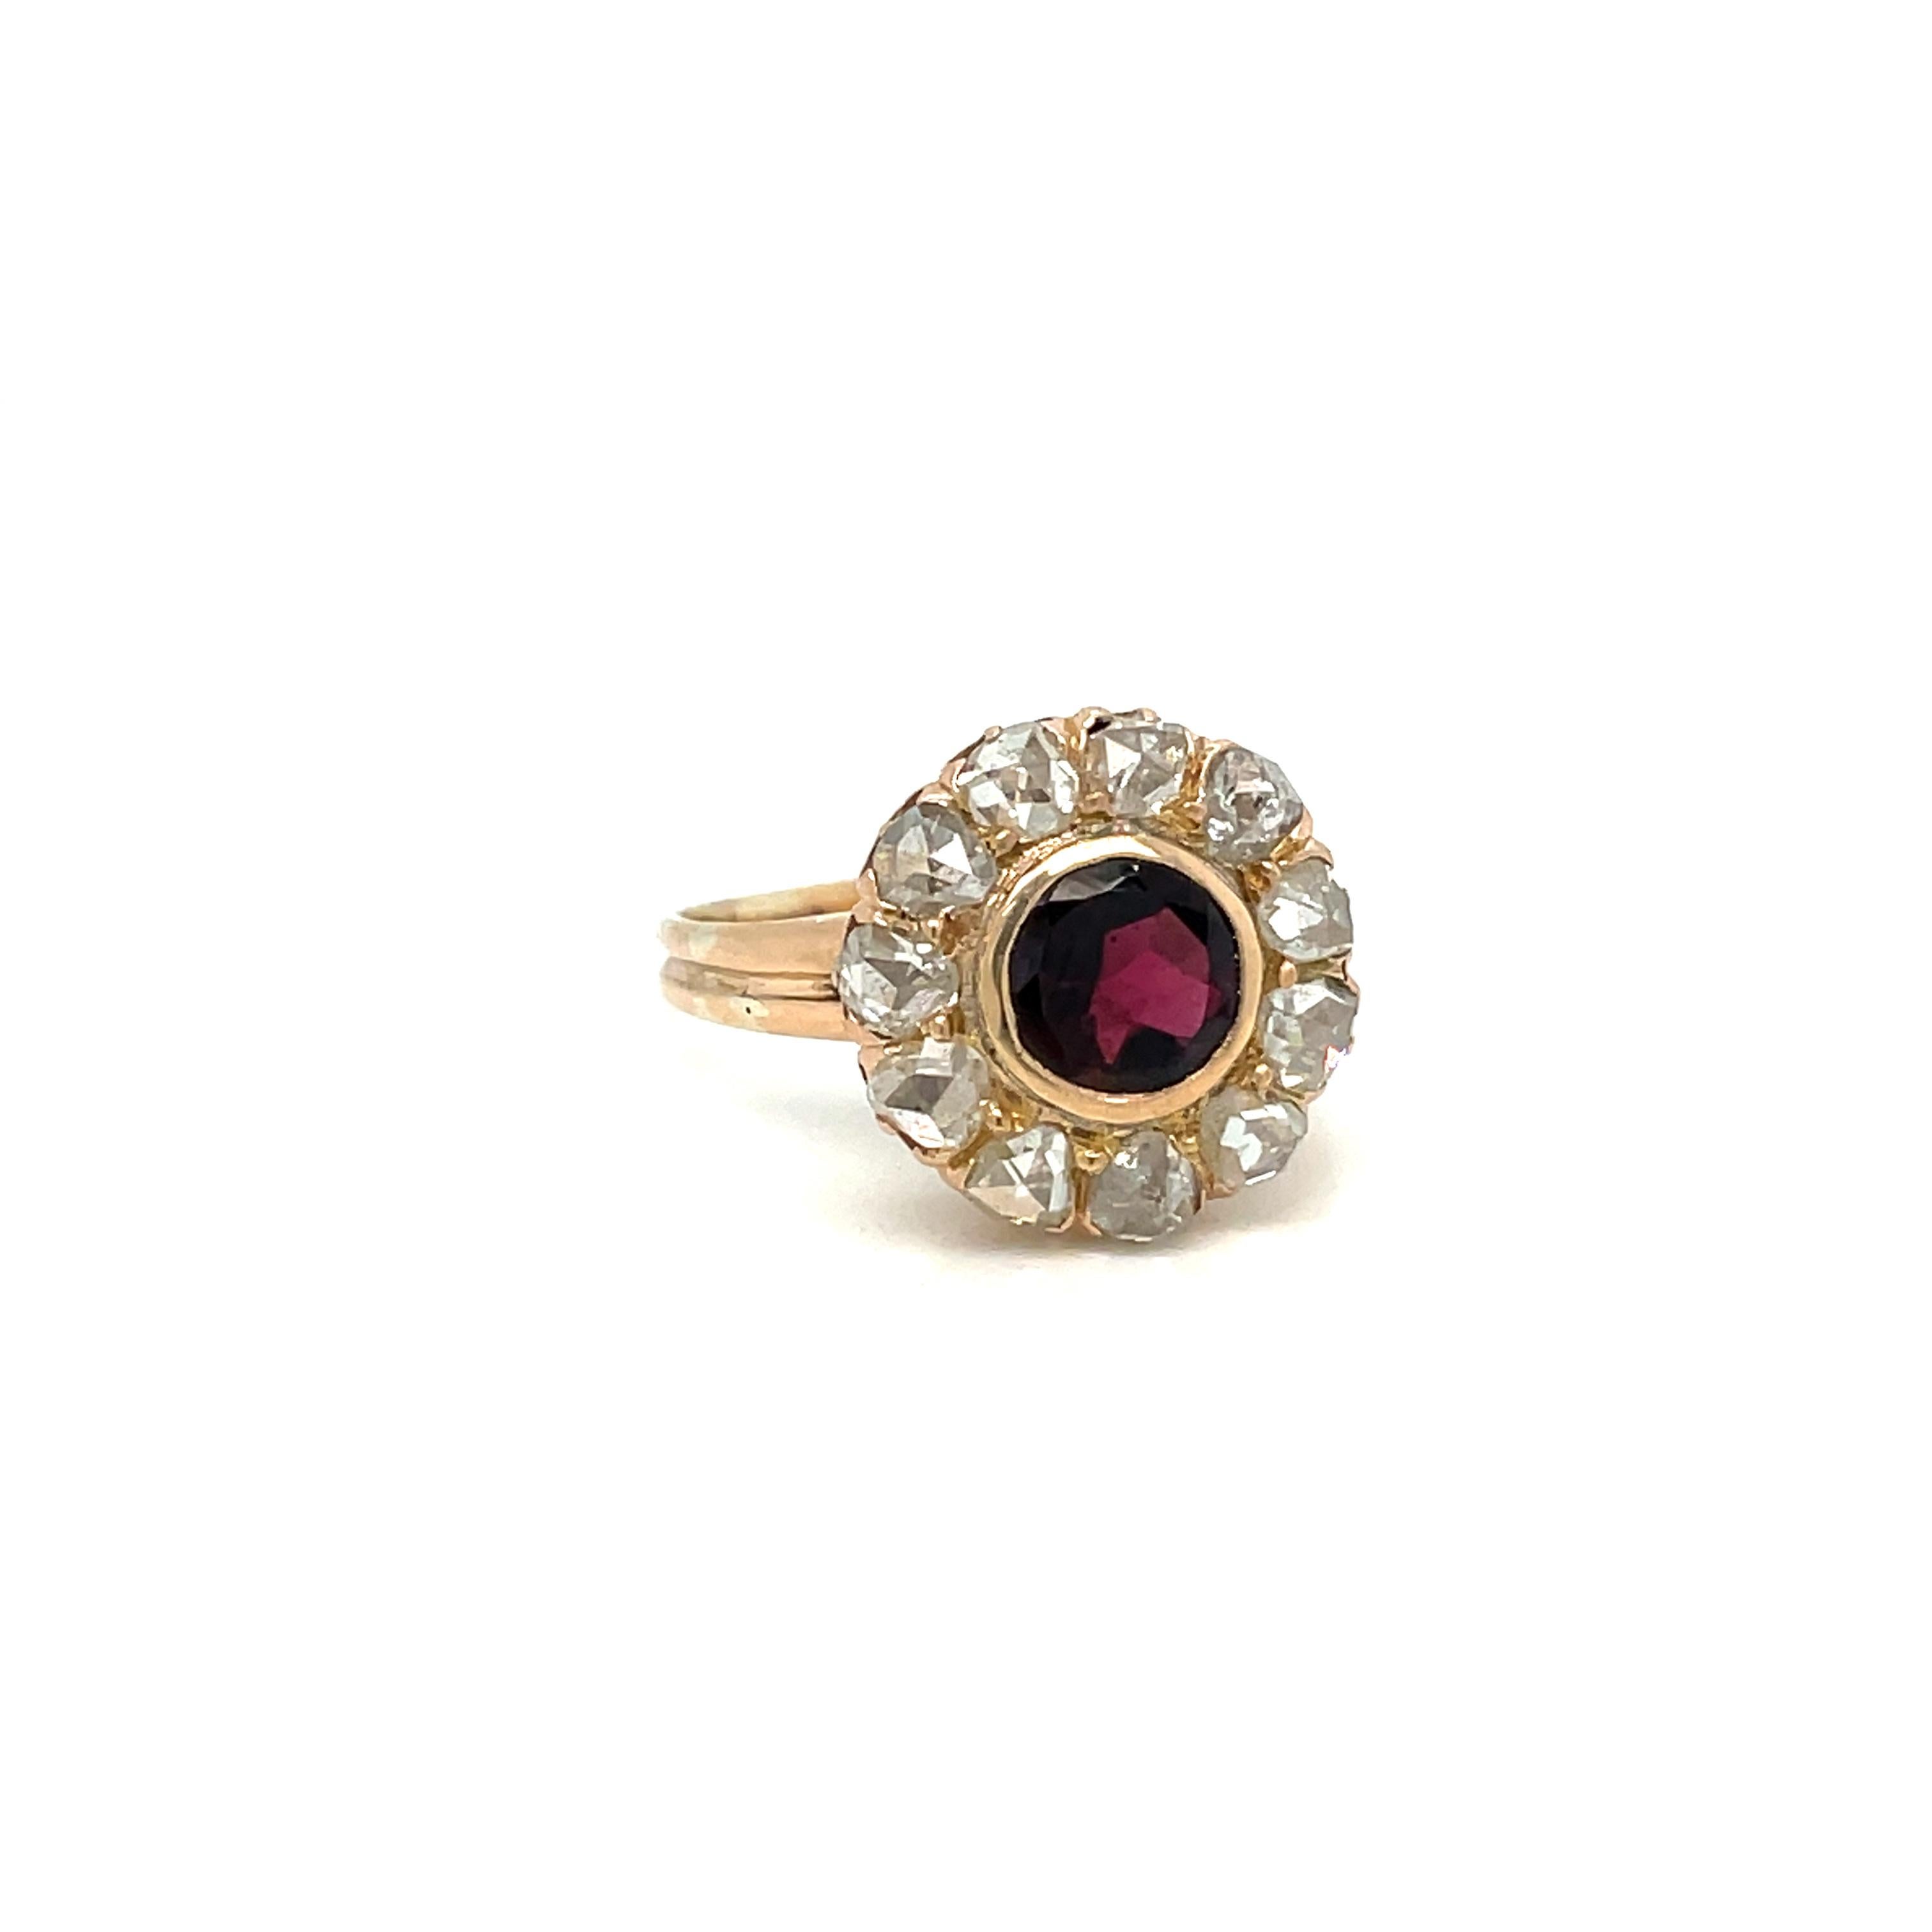 Antique 18K yellow Gold Garnet and Diamond ring. 
The cluster style ring is centered with an approximately 2.50 carats stunning round garnet, accented by an halo of rose cut diamonds weighing approx. 1.80 carats total. 1900 circa

CONDITION: